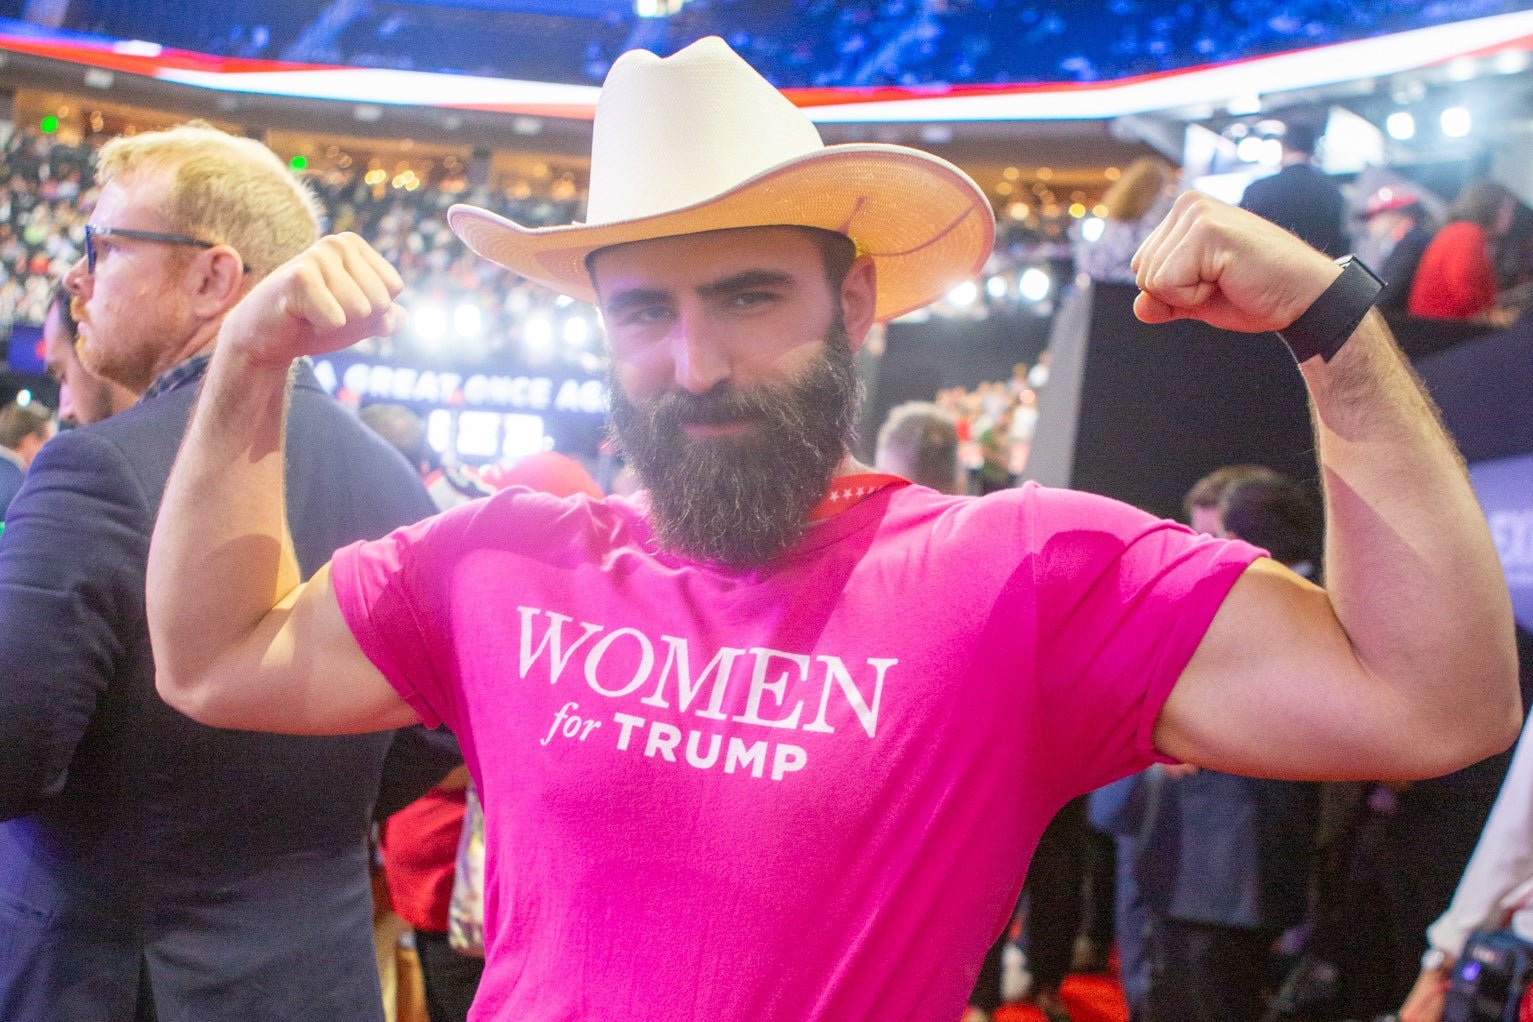 I Spent Days Roaming the Republican National Convention. This Is What I Saw.